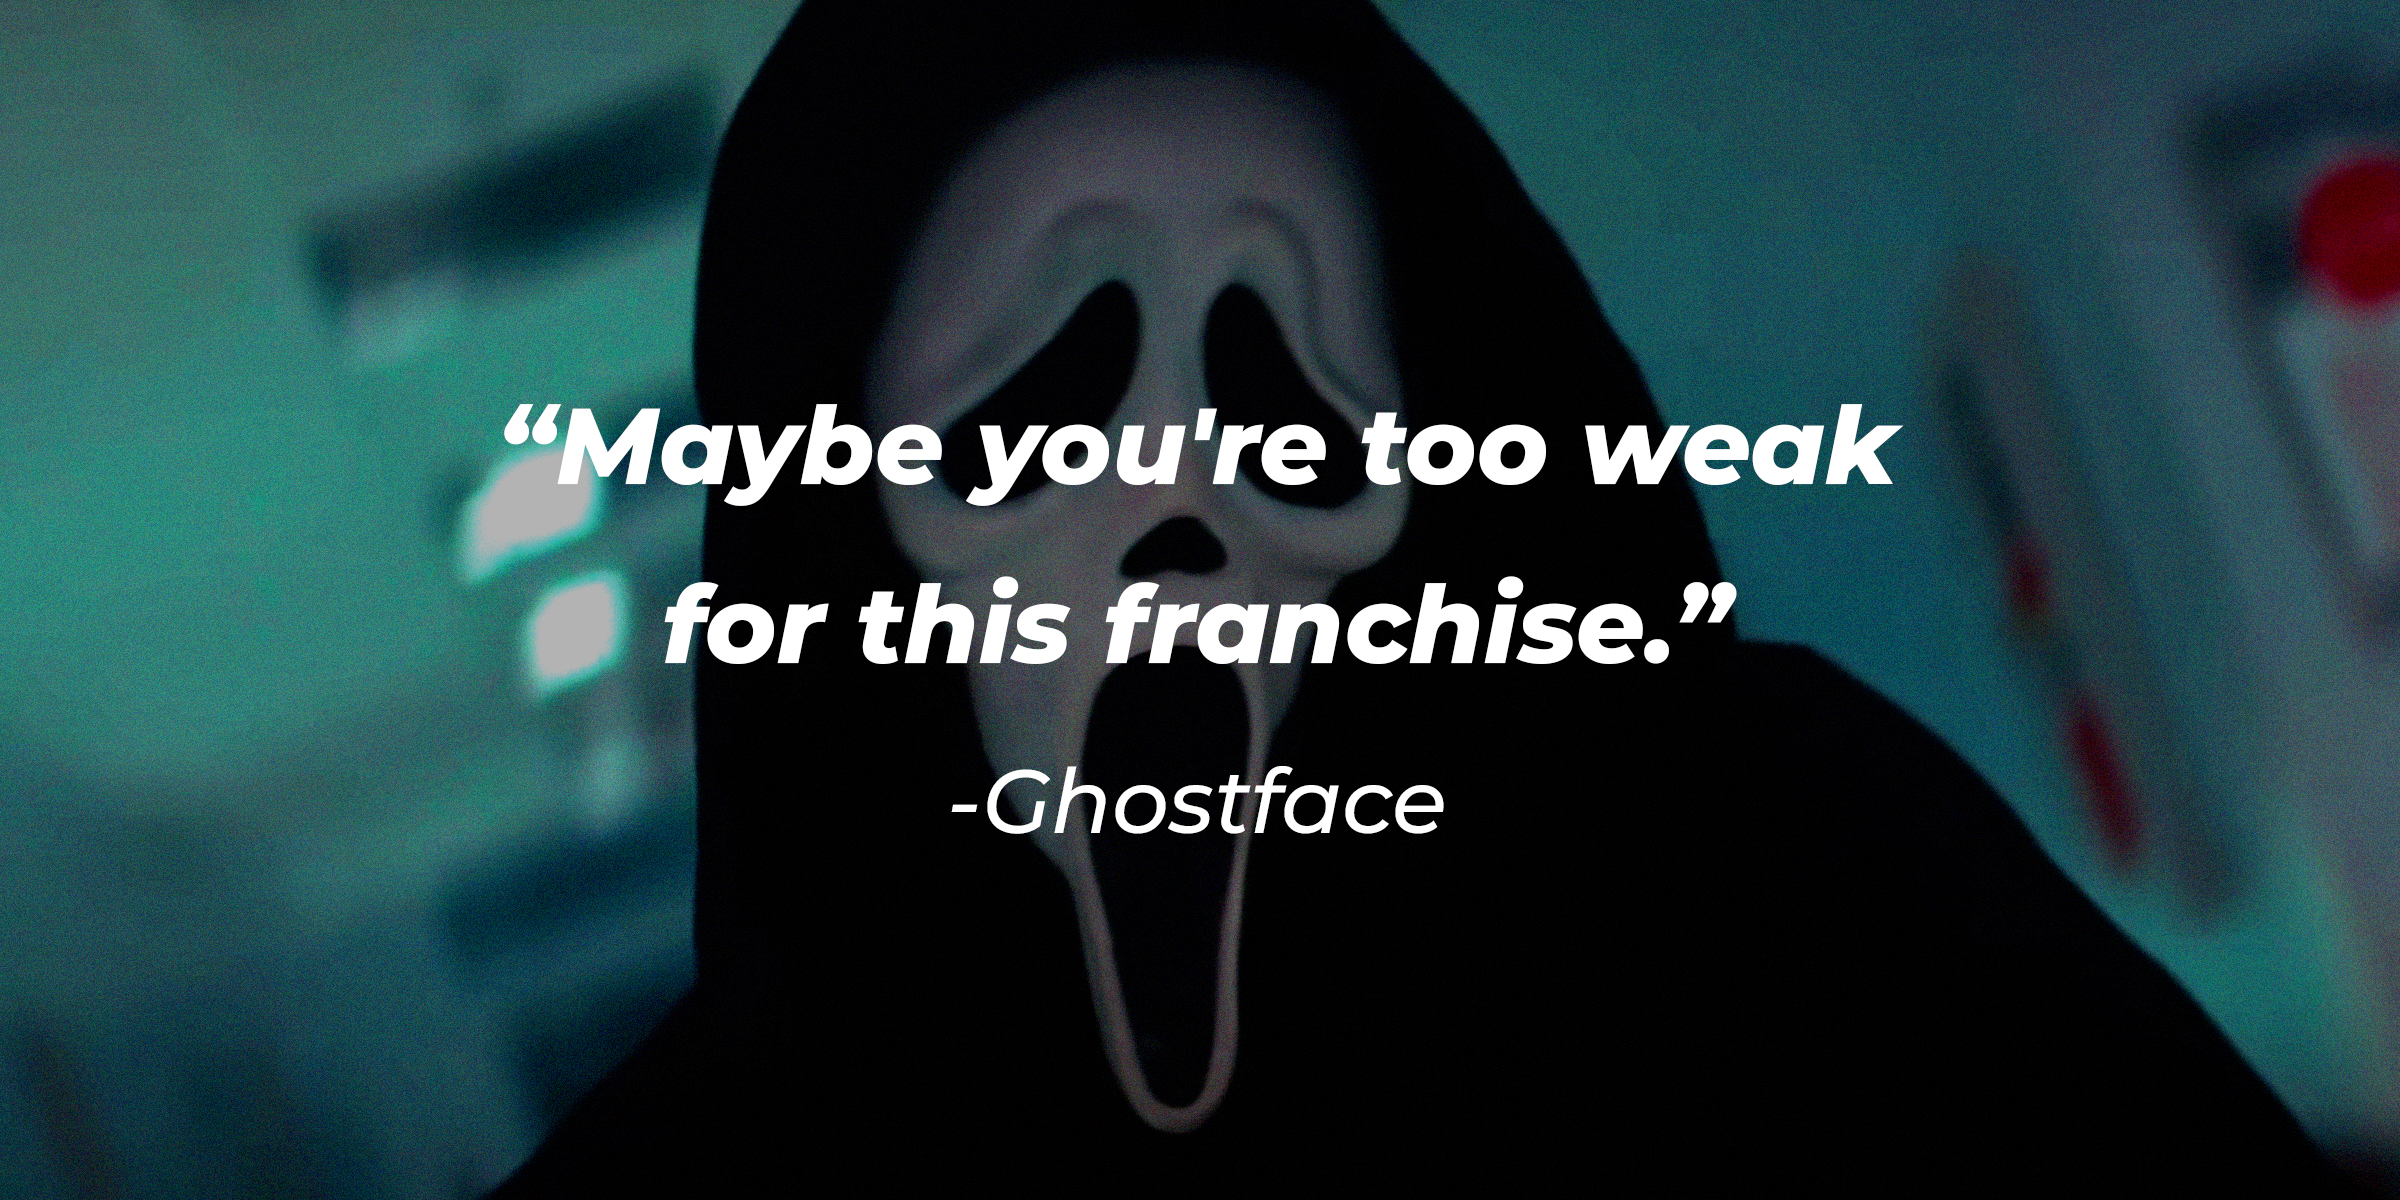 The character from “Scream” Ghostface, with their quote: “Maybe you’re too weak for this franchise.” | Source: Youtube.com/paramountpictures